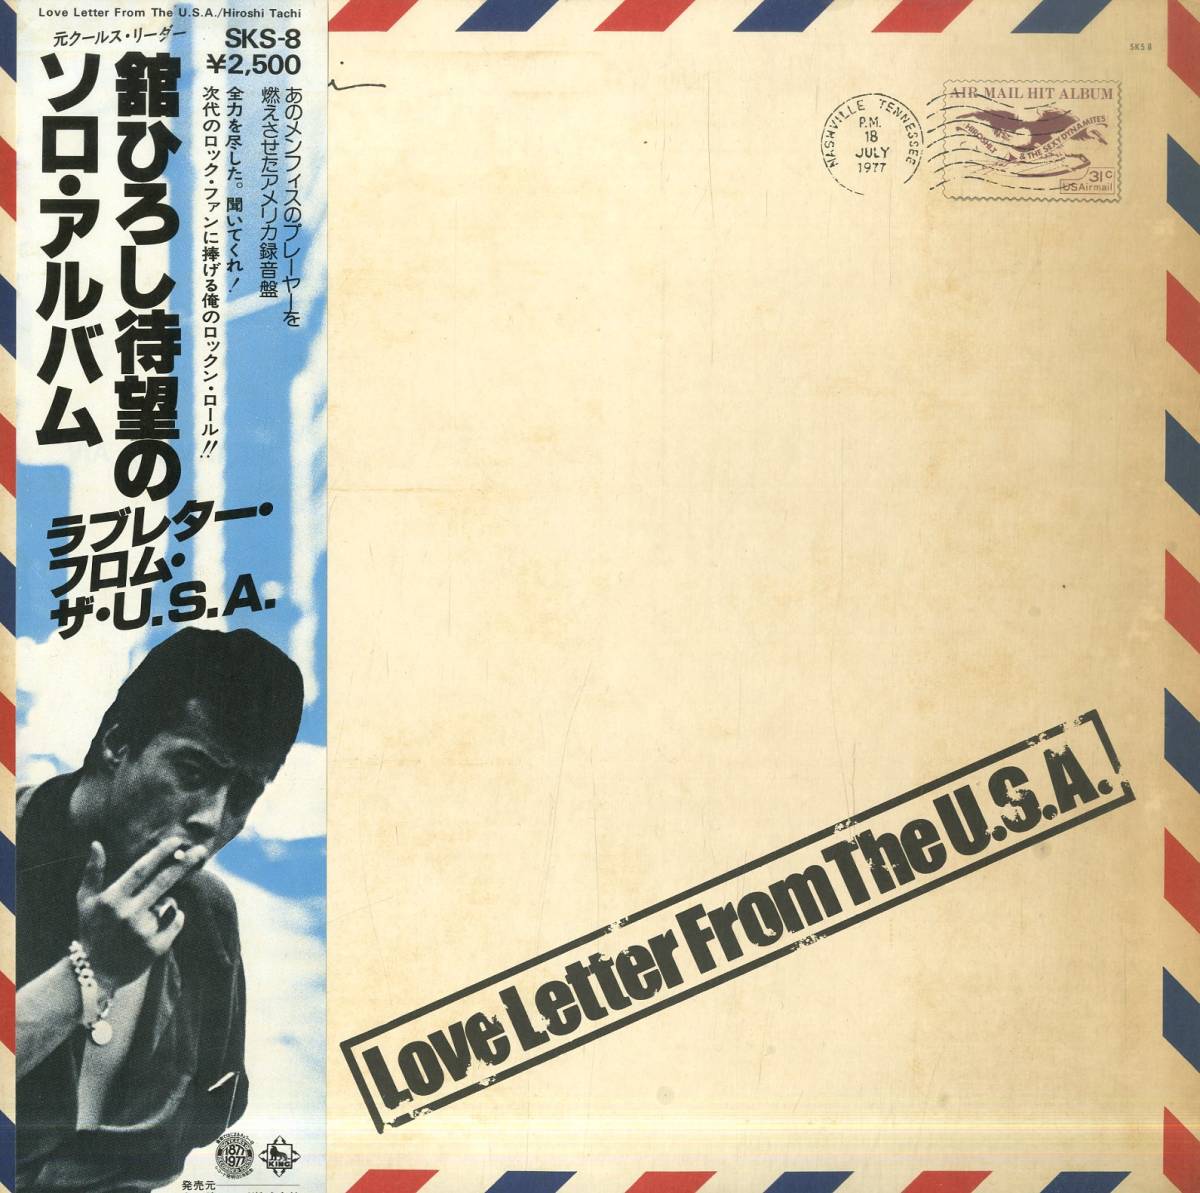 A00573551/LP/舘ひろし(クールスR.C.)「Love Letter From The U.S.A. (1977年・SKS-8・ALAN MOORE編曲)」_画像1